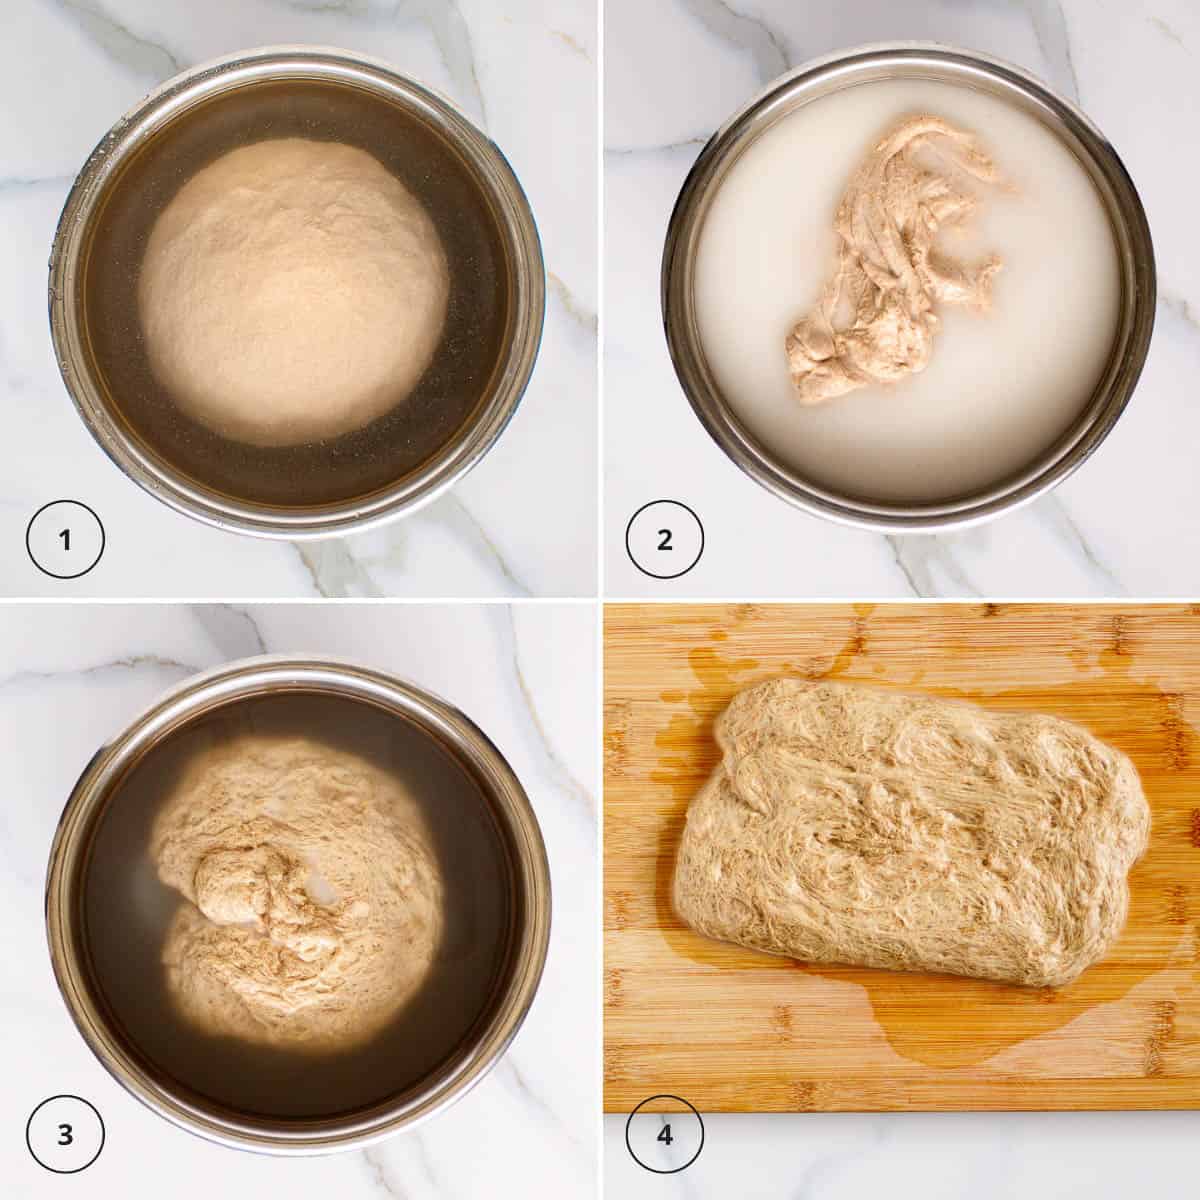 Wash ball of bread dough under water to remove starch.